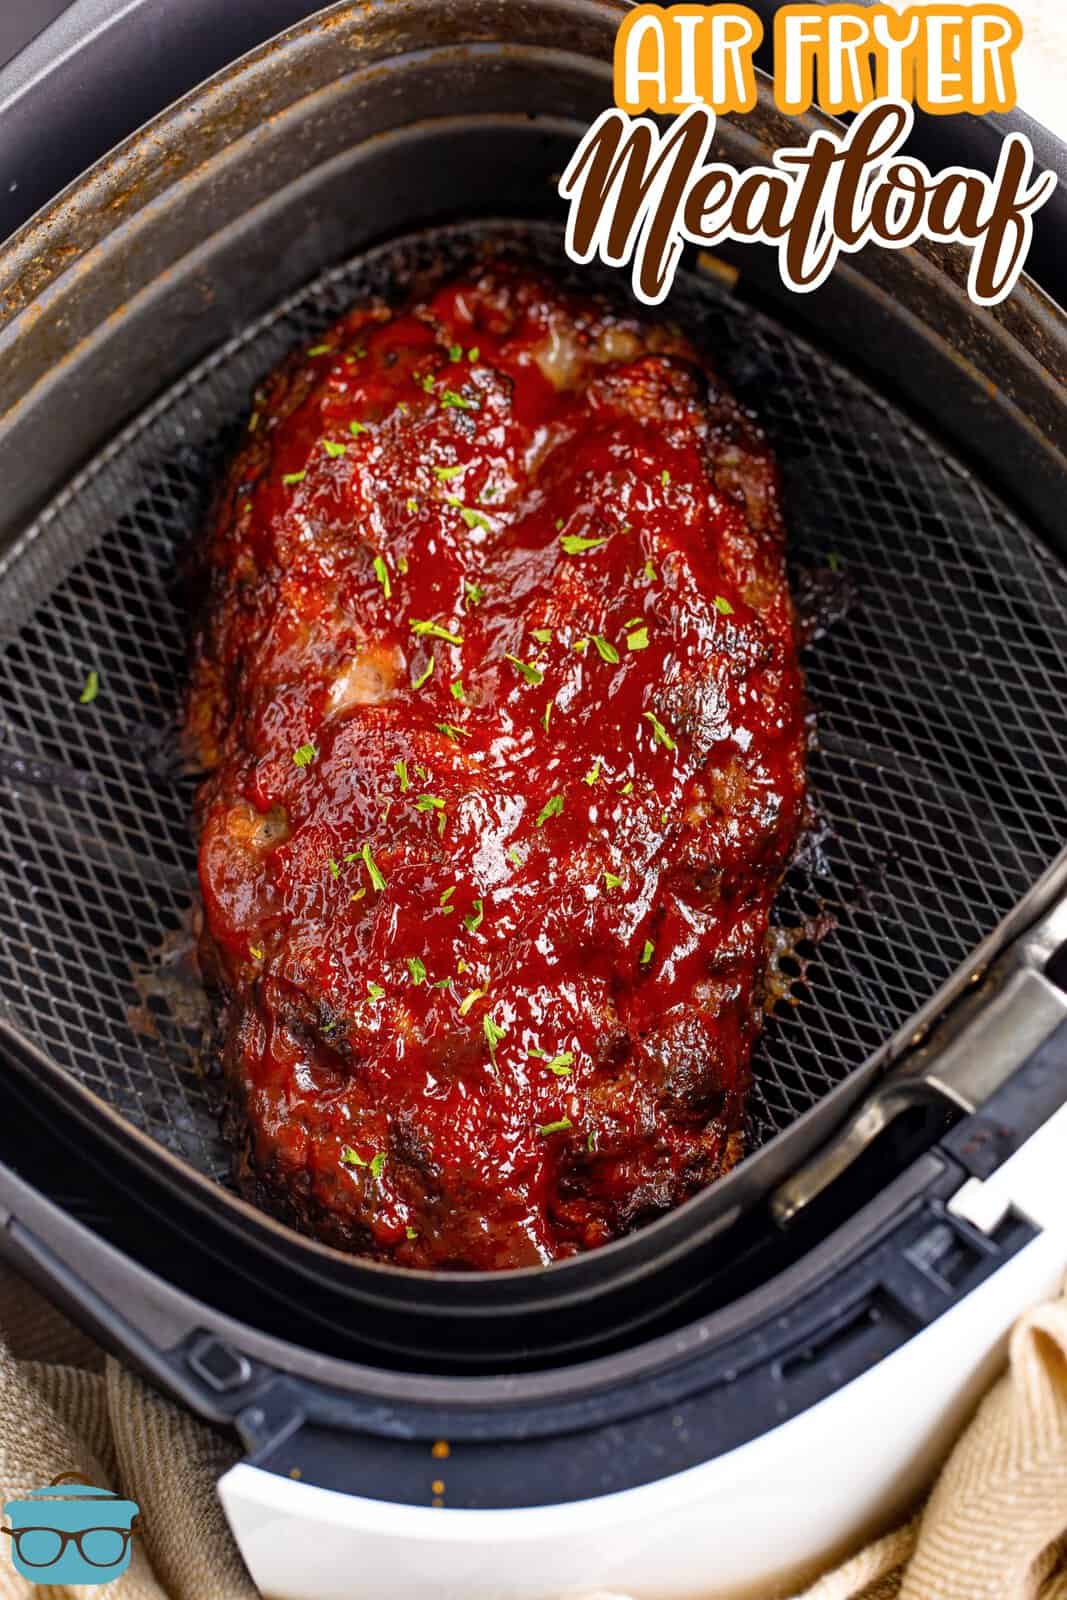 An air fryer basket with a loaf of meatloaf.